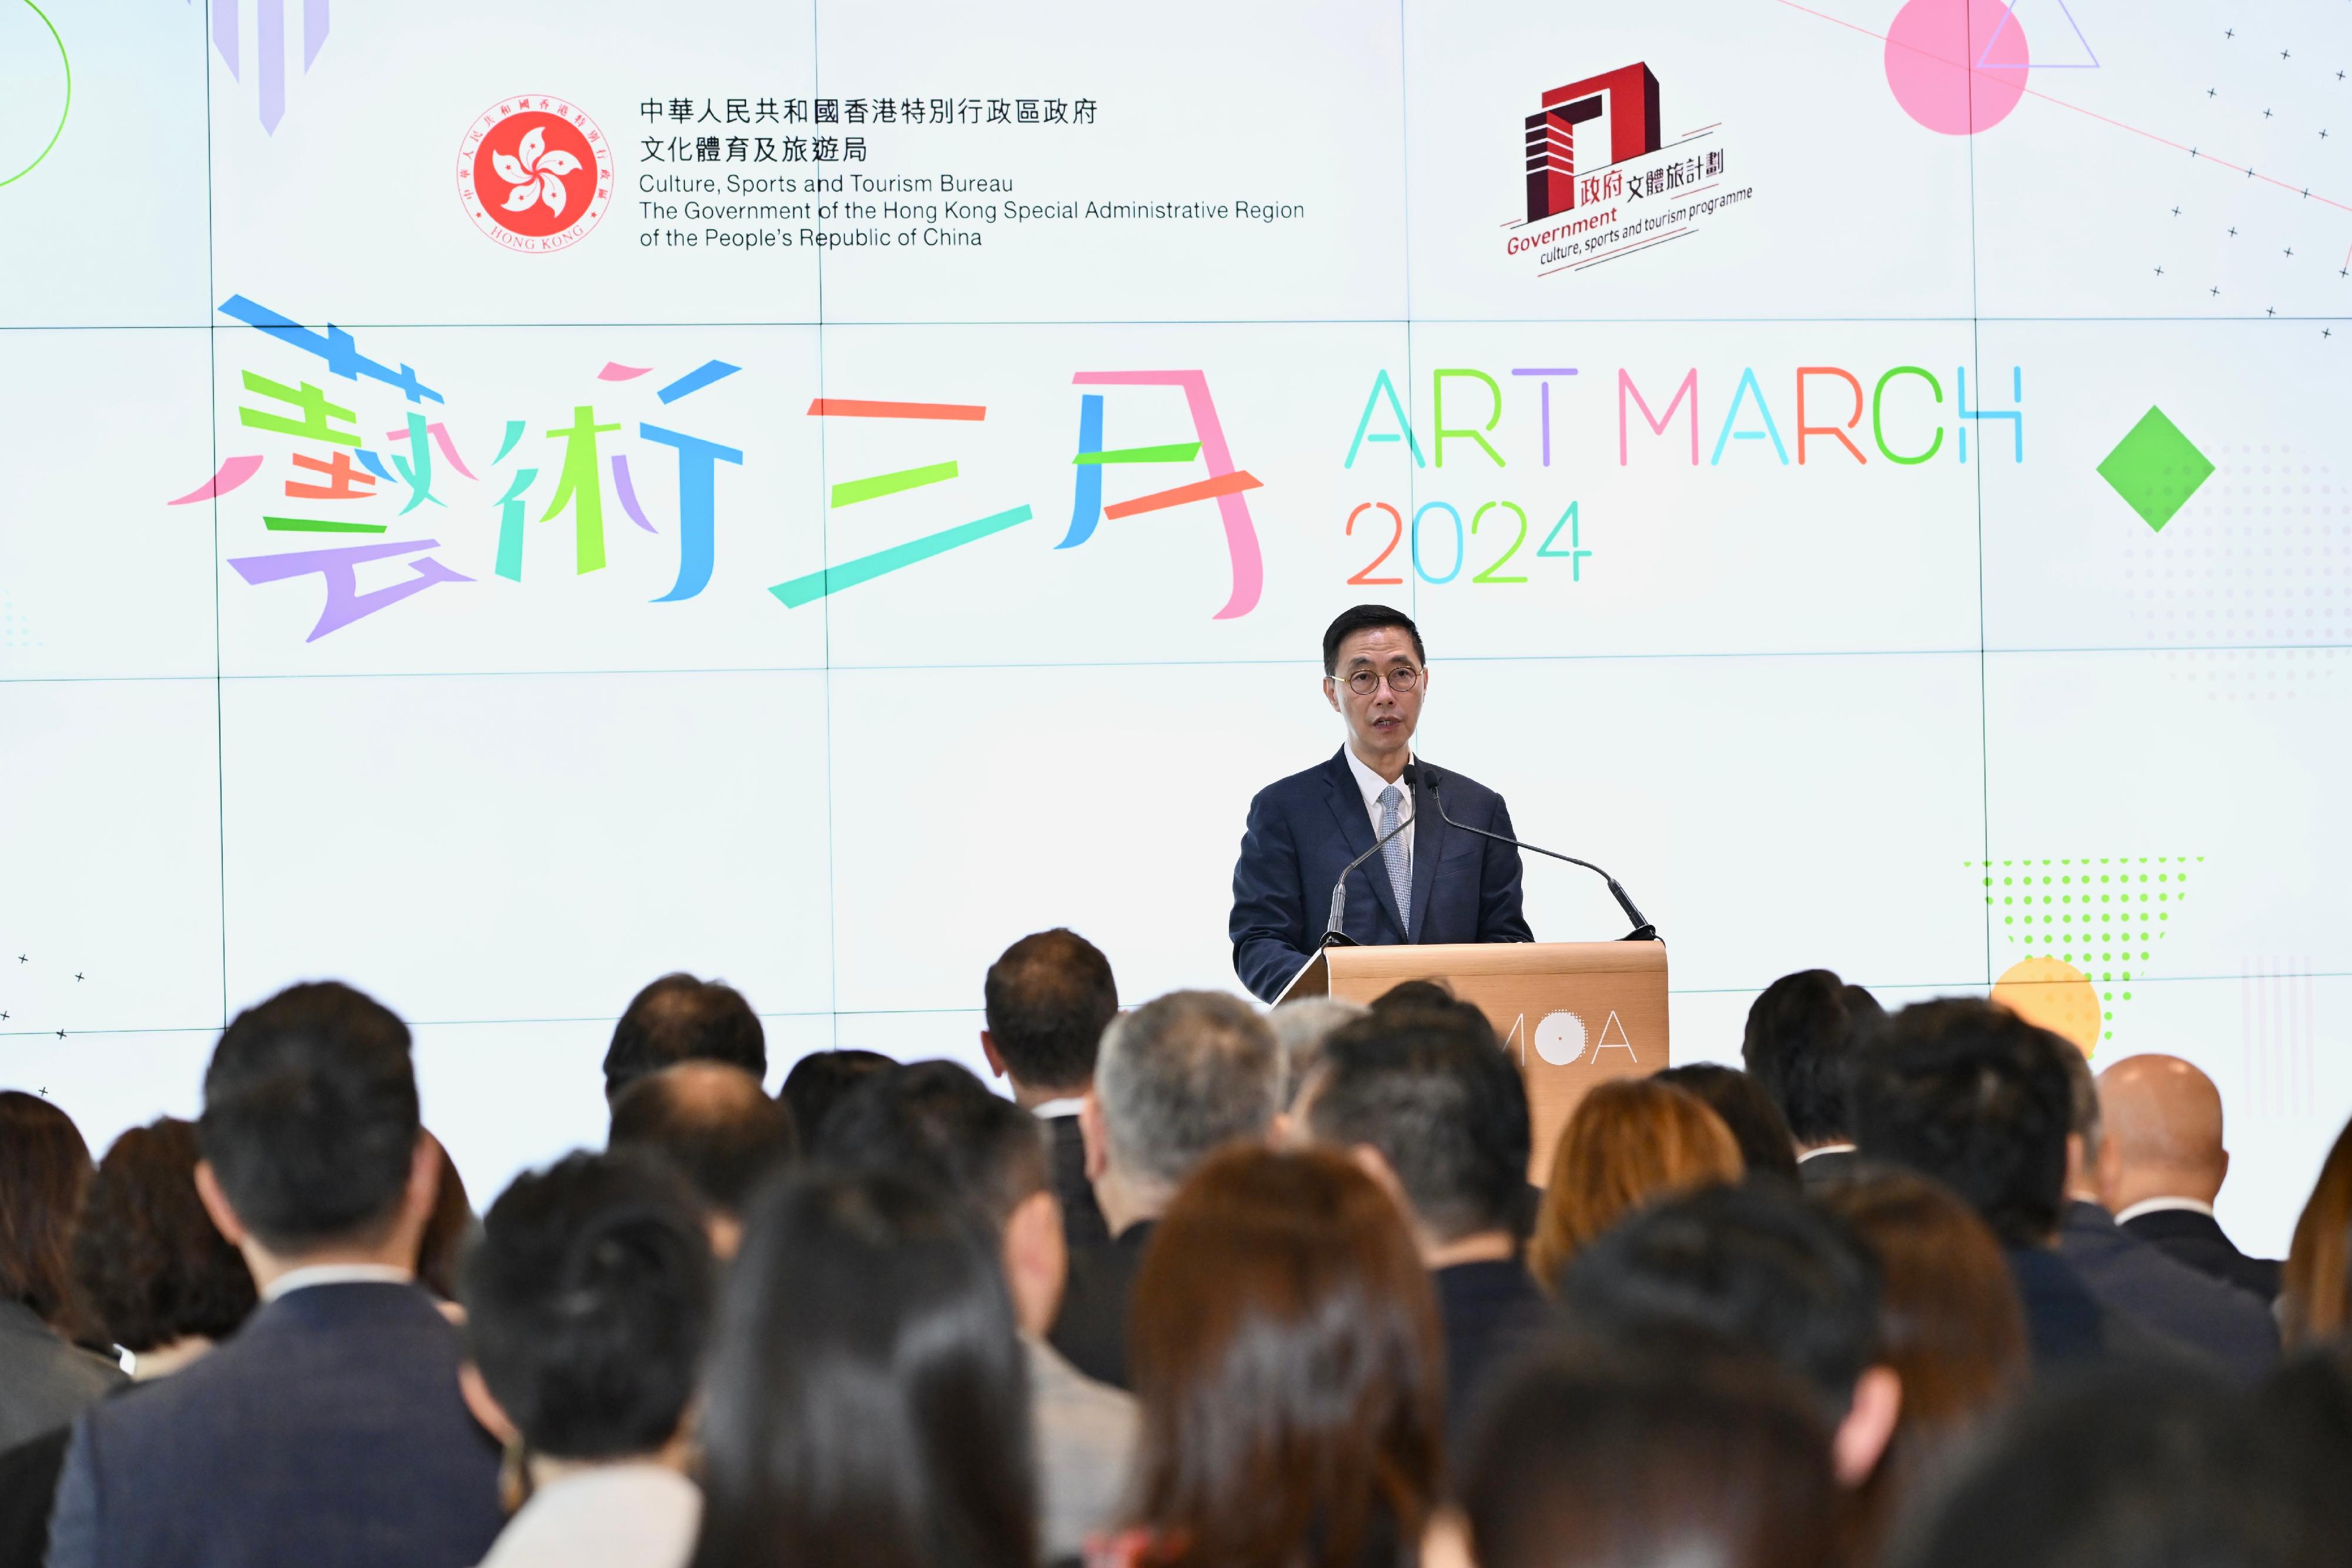 The launching ceremony of Art March 2024 was held today (February 22). Photo shows the Secretary for Culture, Sports and Tourism, Mr Kevin Yeung, giving a speech.